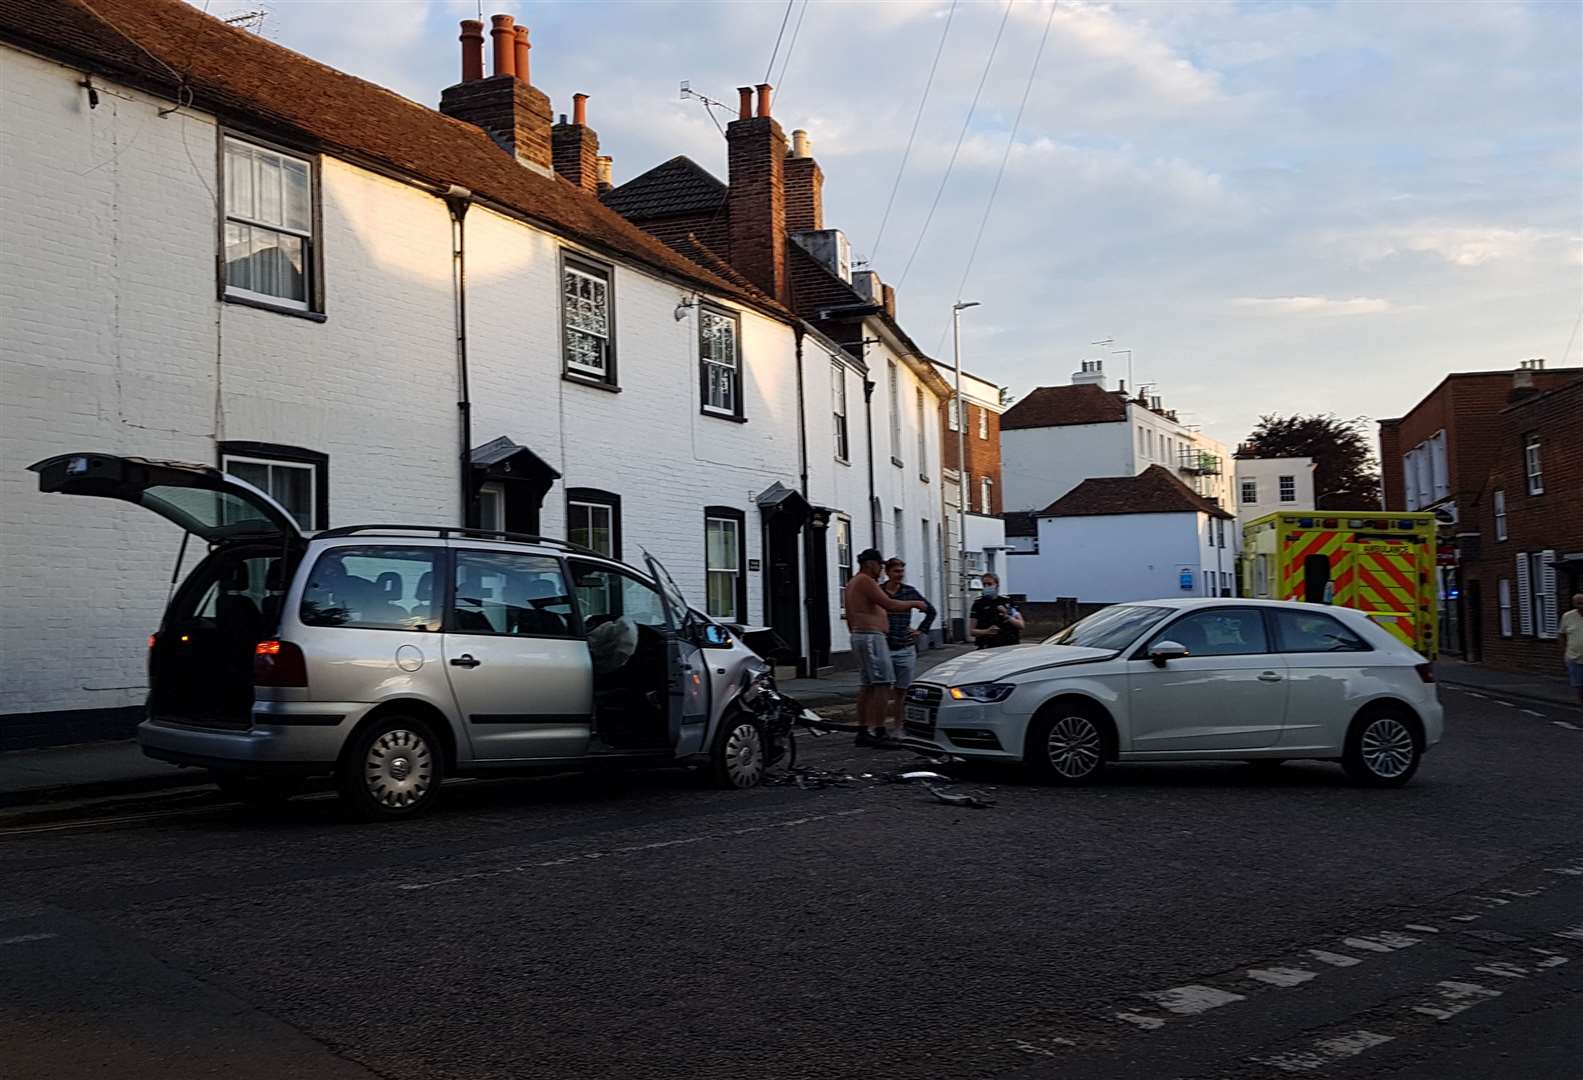 Police and paramedics were called to the scene of the crash